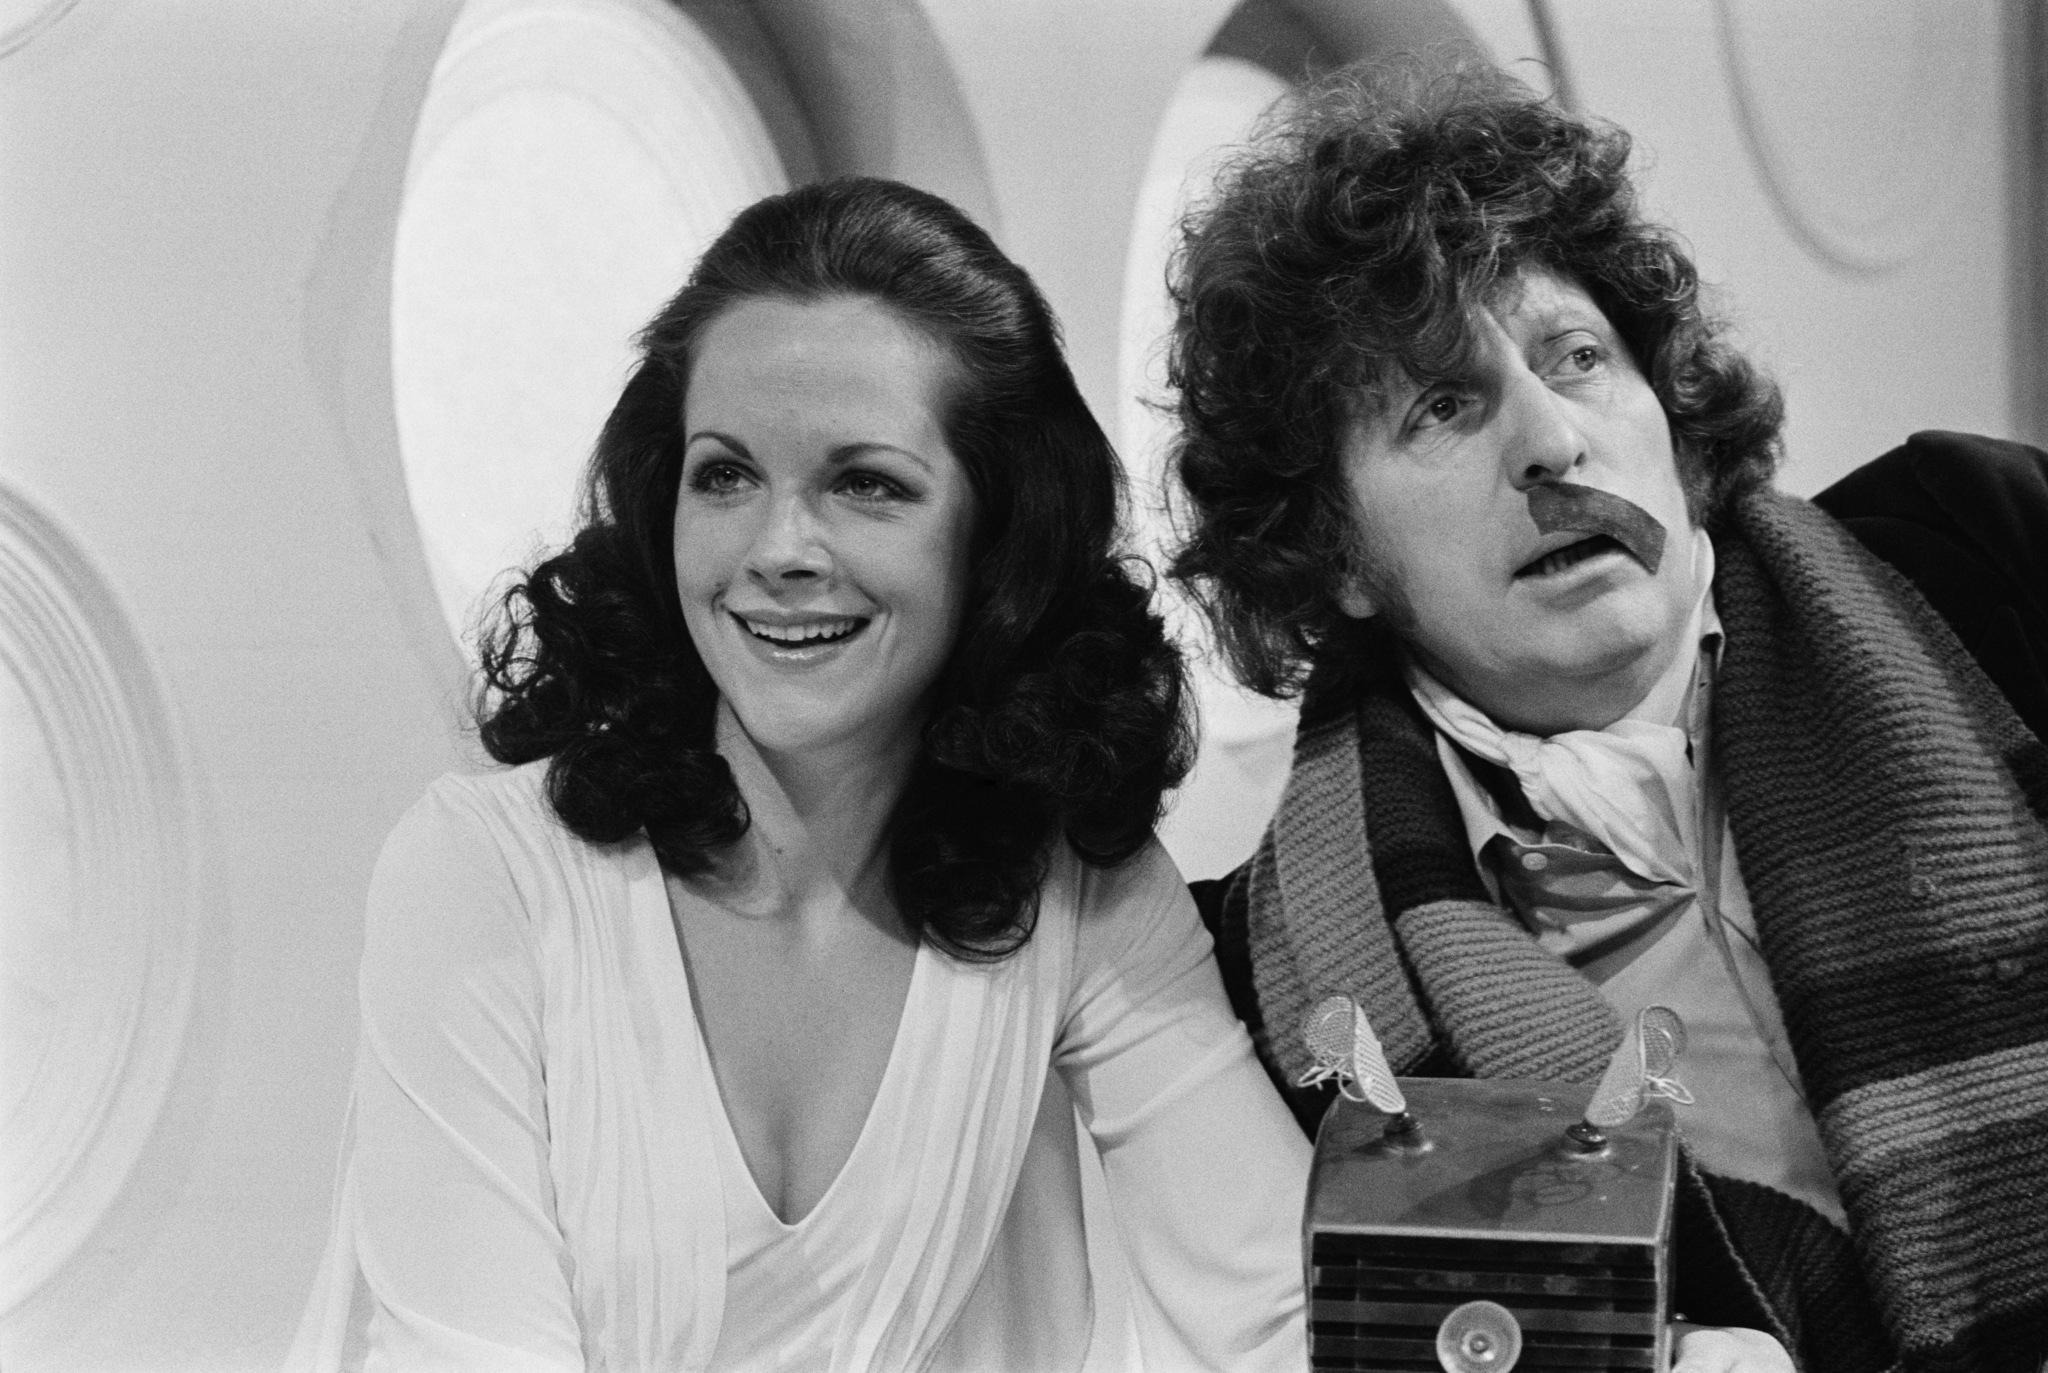 Tom Baker, as Doctor Who, and Mary Tamm as his companion, Romana, on the set of the BBC television science fiction series 'Doctor Who', at BBC TV Centre, London, 25th April 1978.